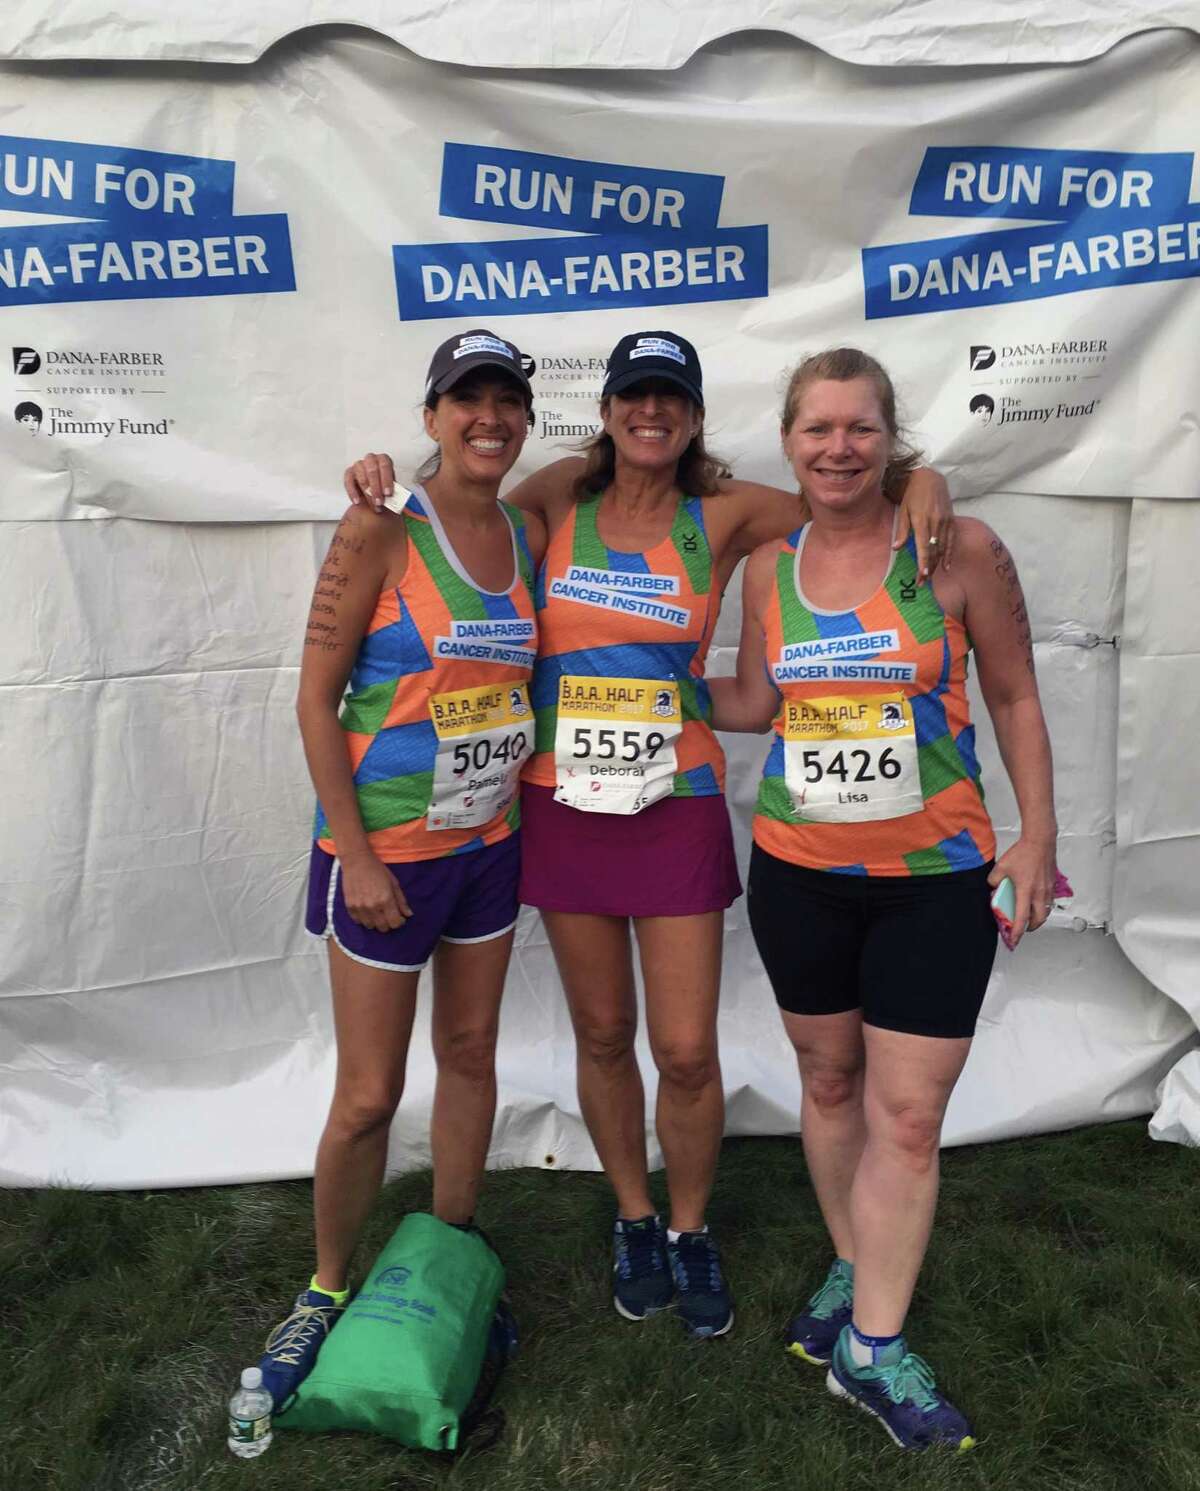 From left to right, Pamela Karpen, her sister, Deborah Sloan, and their friend, Lisa Singer. Written on their arms are the names of family and friends who had cancer that the trio runs for.